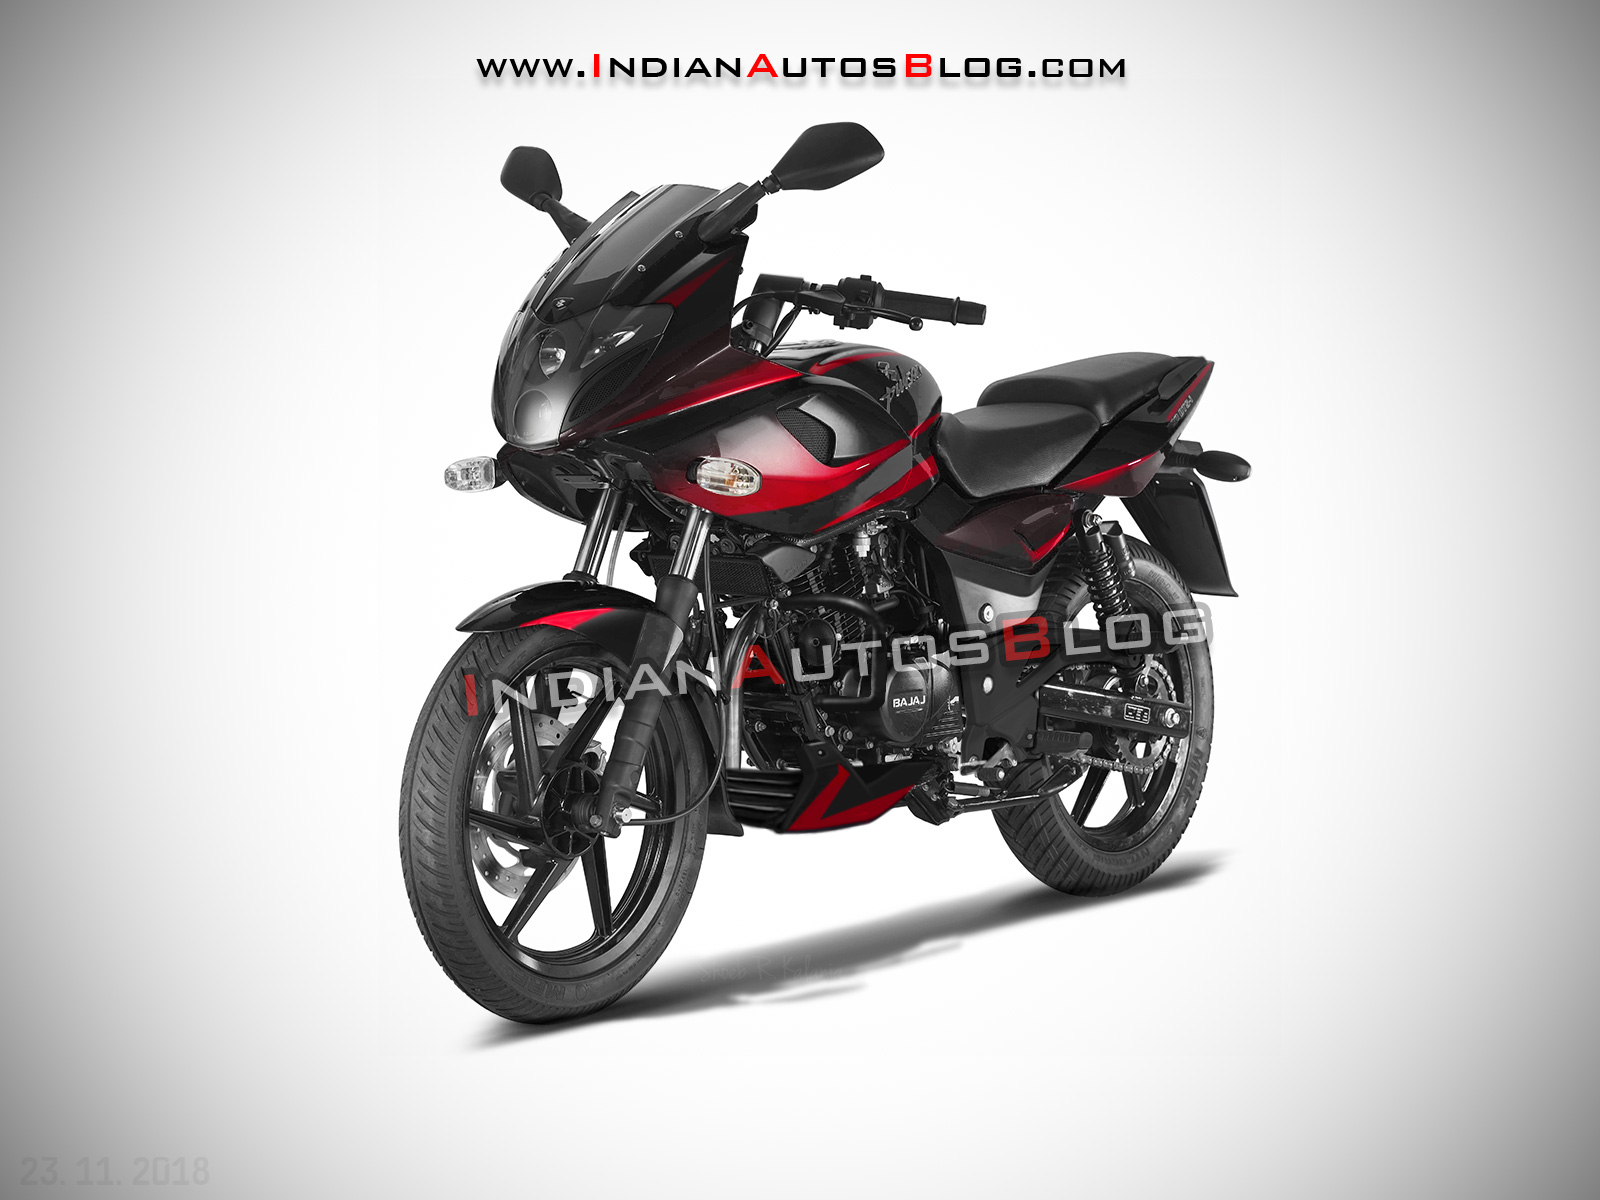 Bajaj Pulsar Abs Range To Launch In India In The First Weeks Of 2019